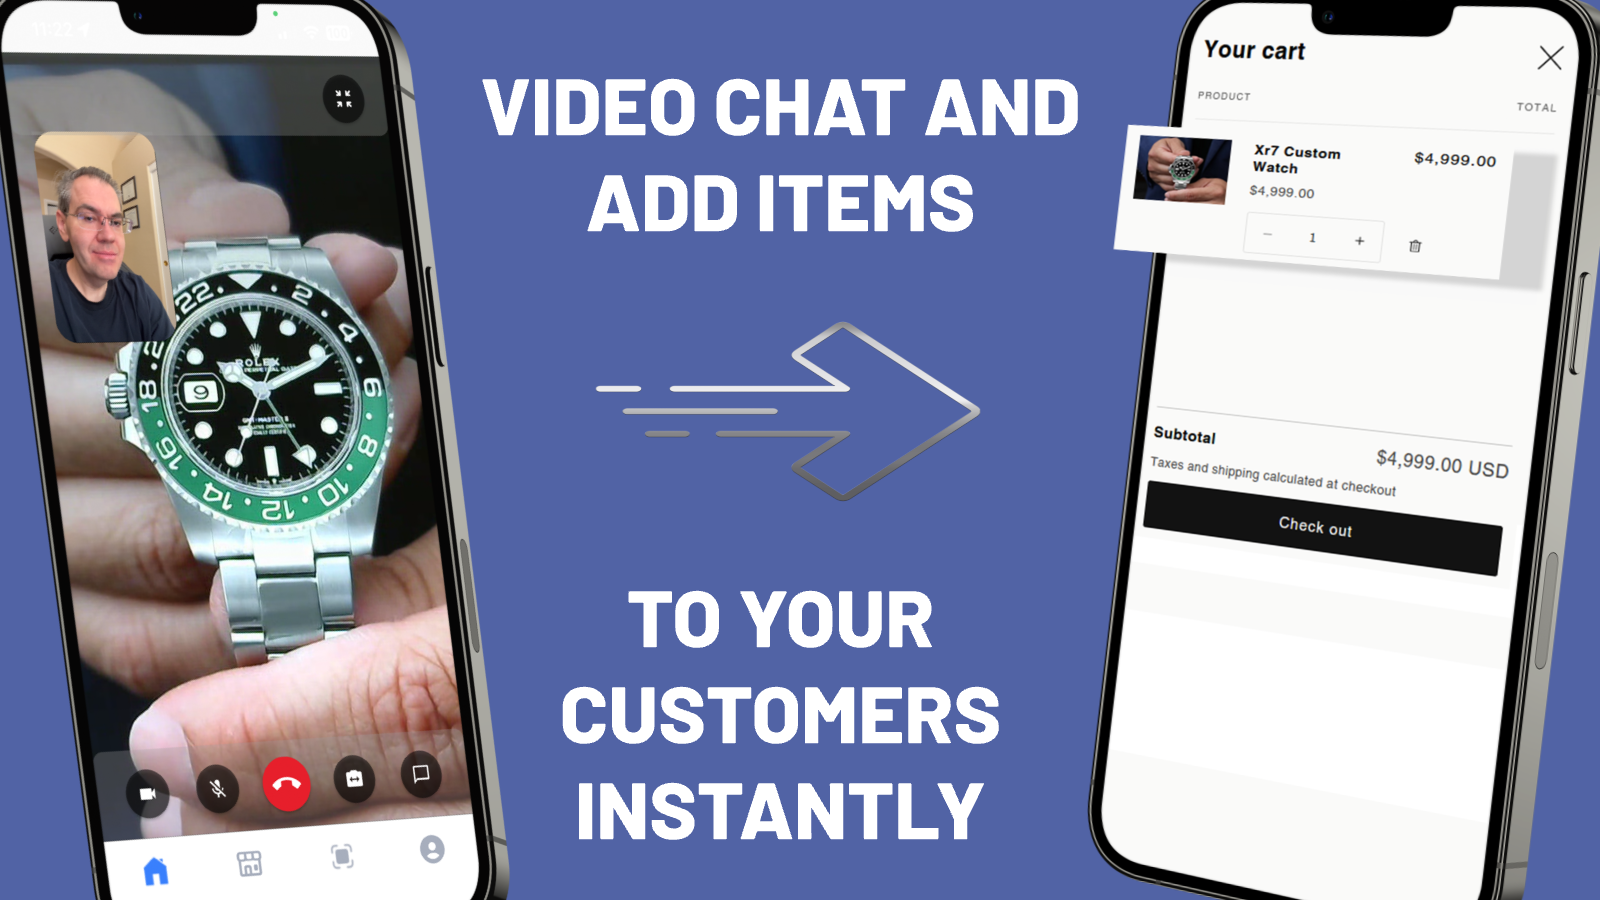 Video Chat and Add Items to Your Customers Instantly